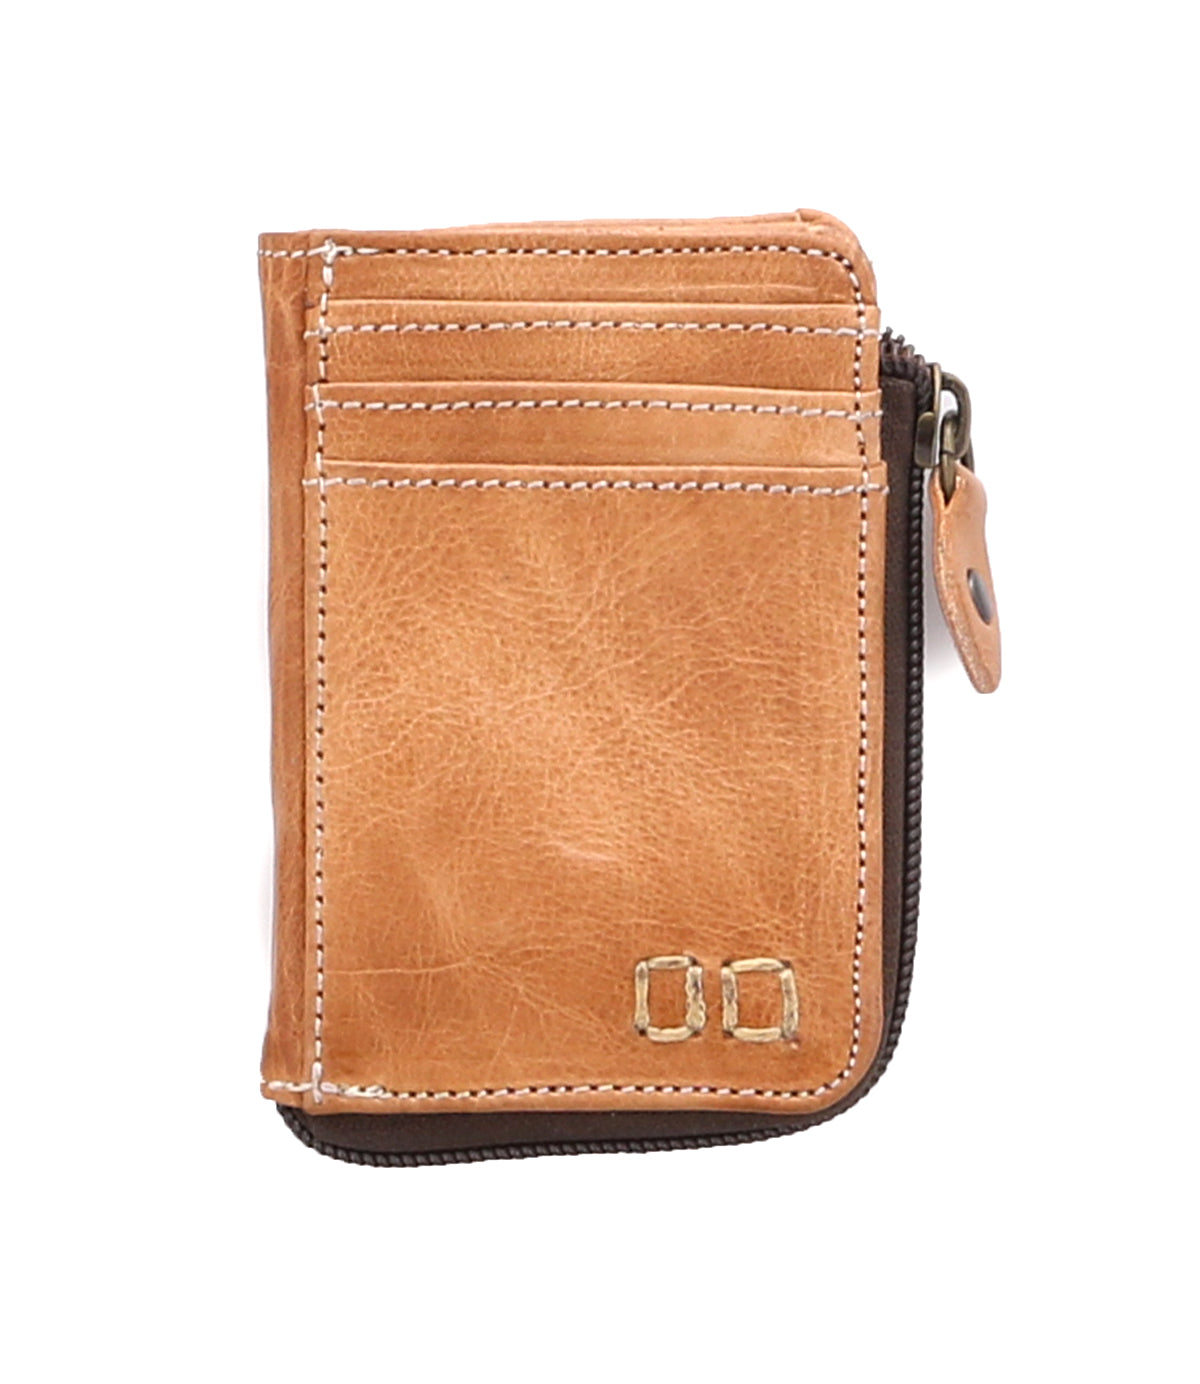 A compact Carrie tan leather wallet with a zipper, perfect for carrying your essentials. This product is from the brand Bed Stu.